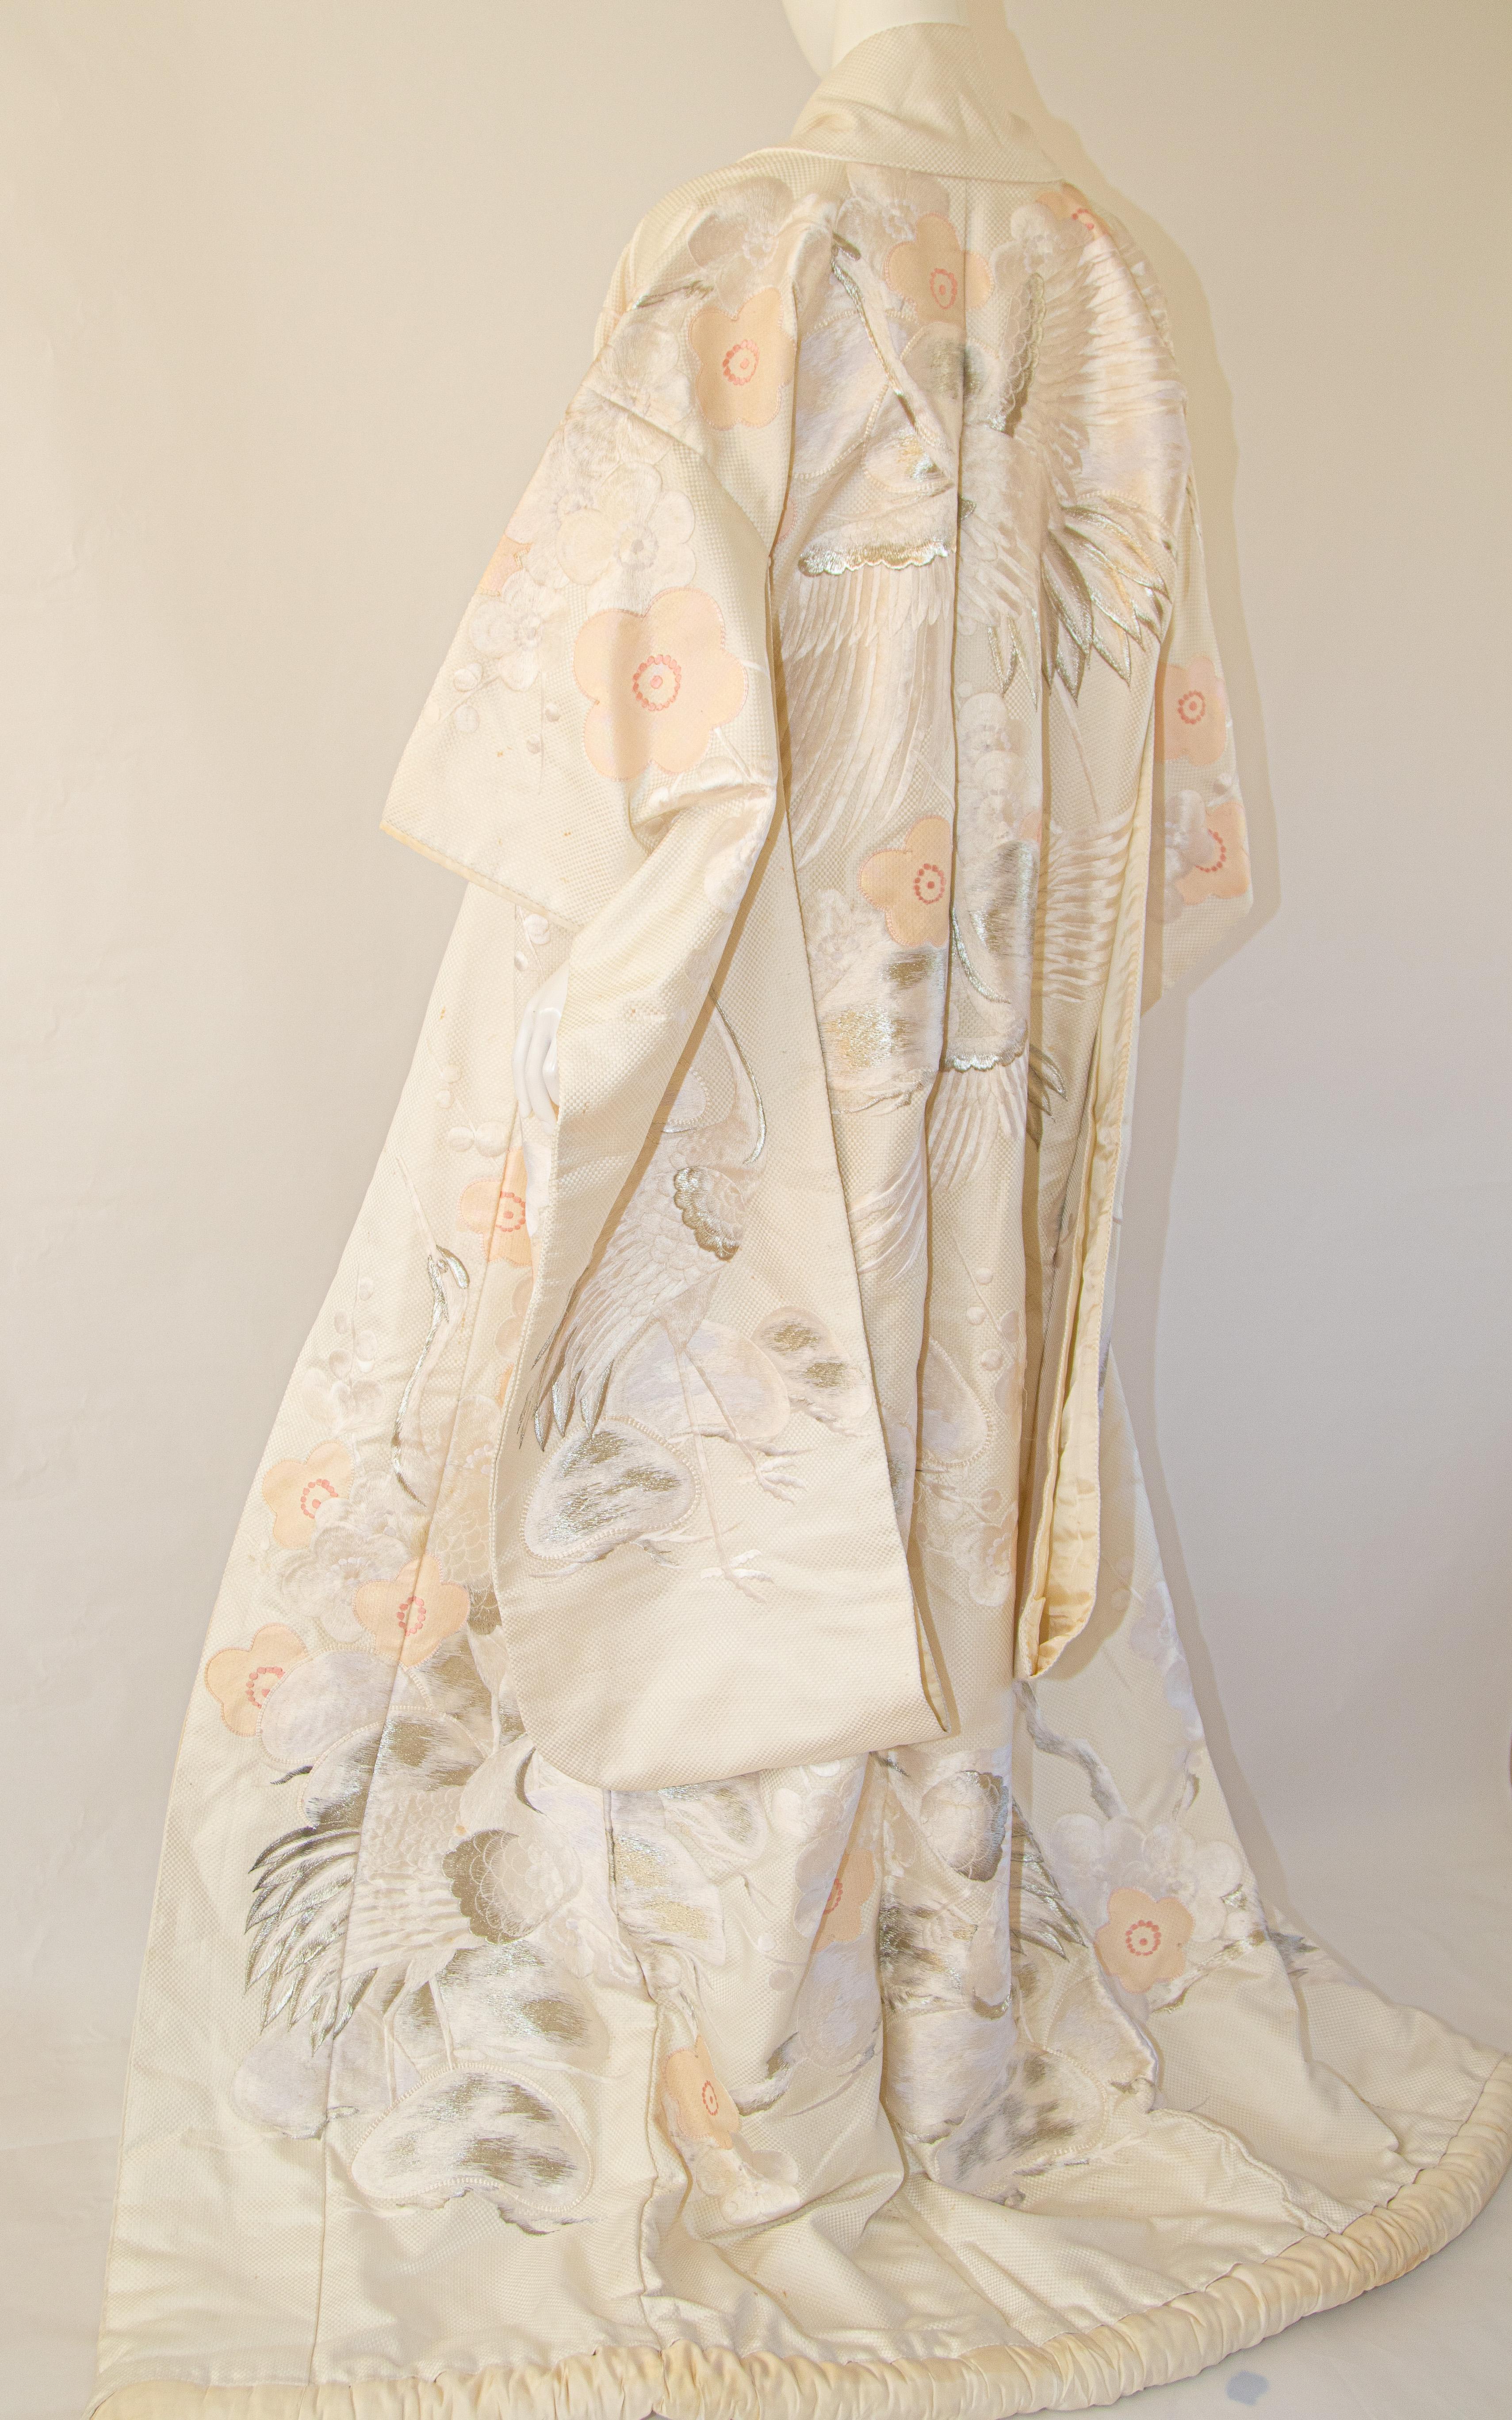 A vintage midcentury ivory white silk brocade collectable Japanese ceremonial wedding kimono.
One of a kind handcrafted fabulous museum quality ceremonial piece in pure silk with intricate detailed hand-embroidery throughout accented with silver